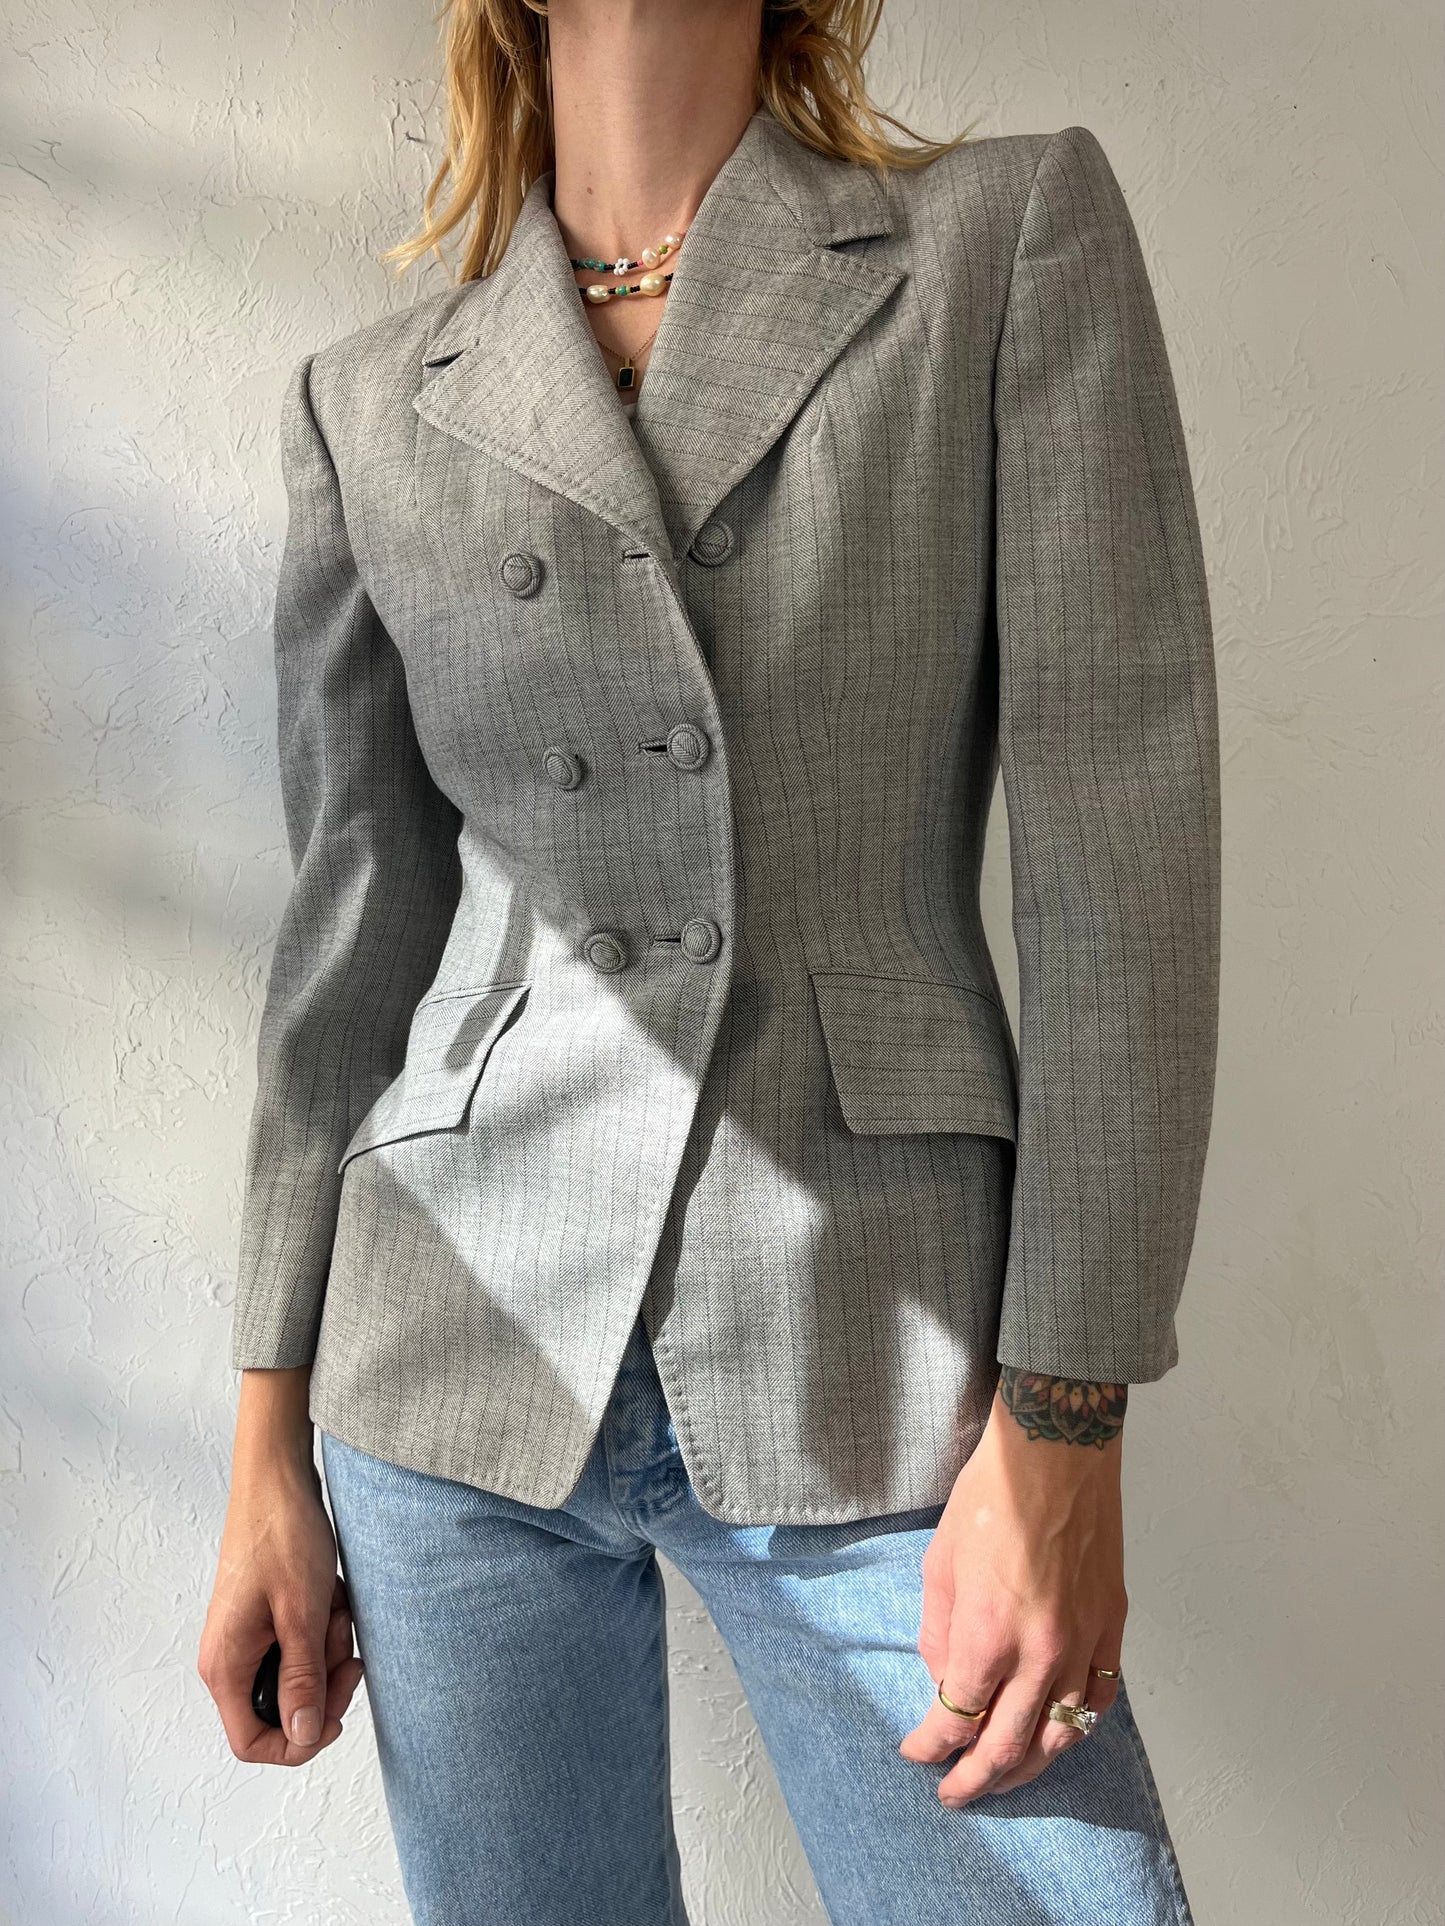 80s 'Tailorbrooke' Gray Pinstripe Womens Suit Jacket / Small